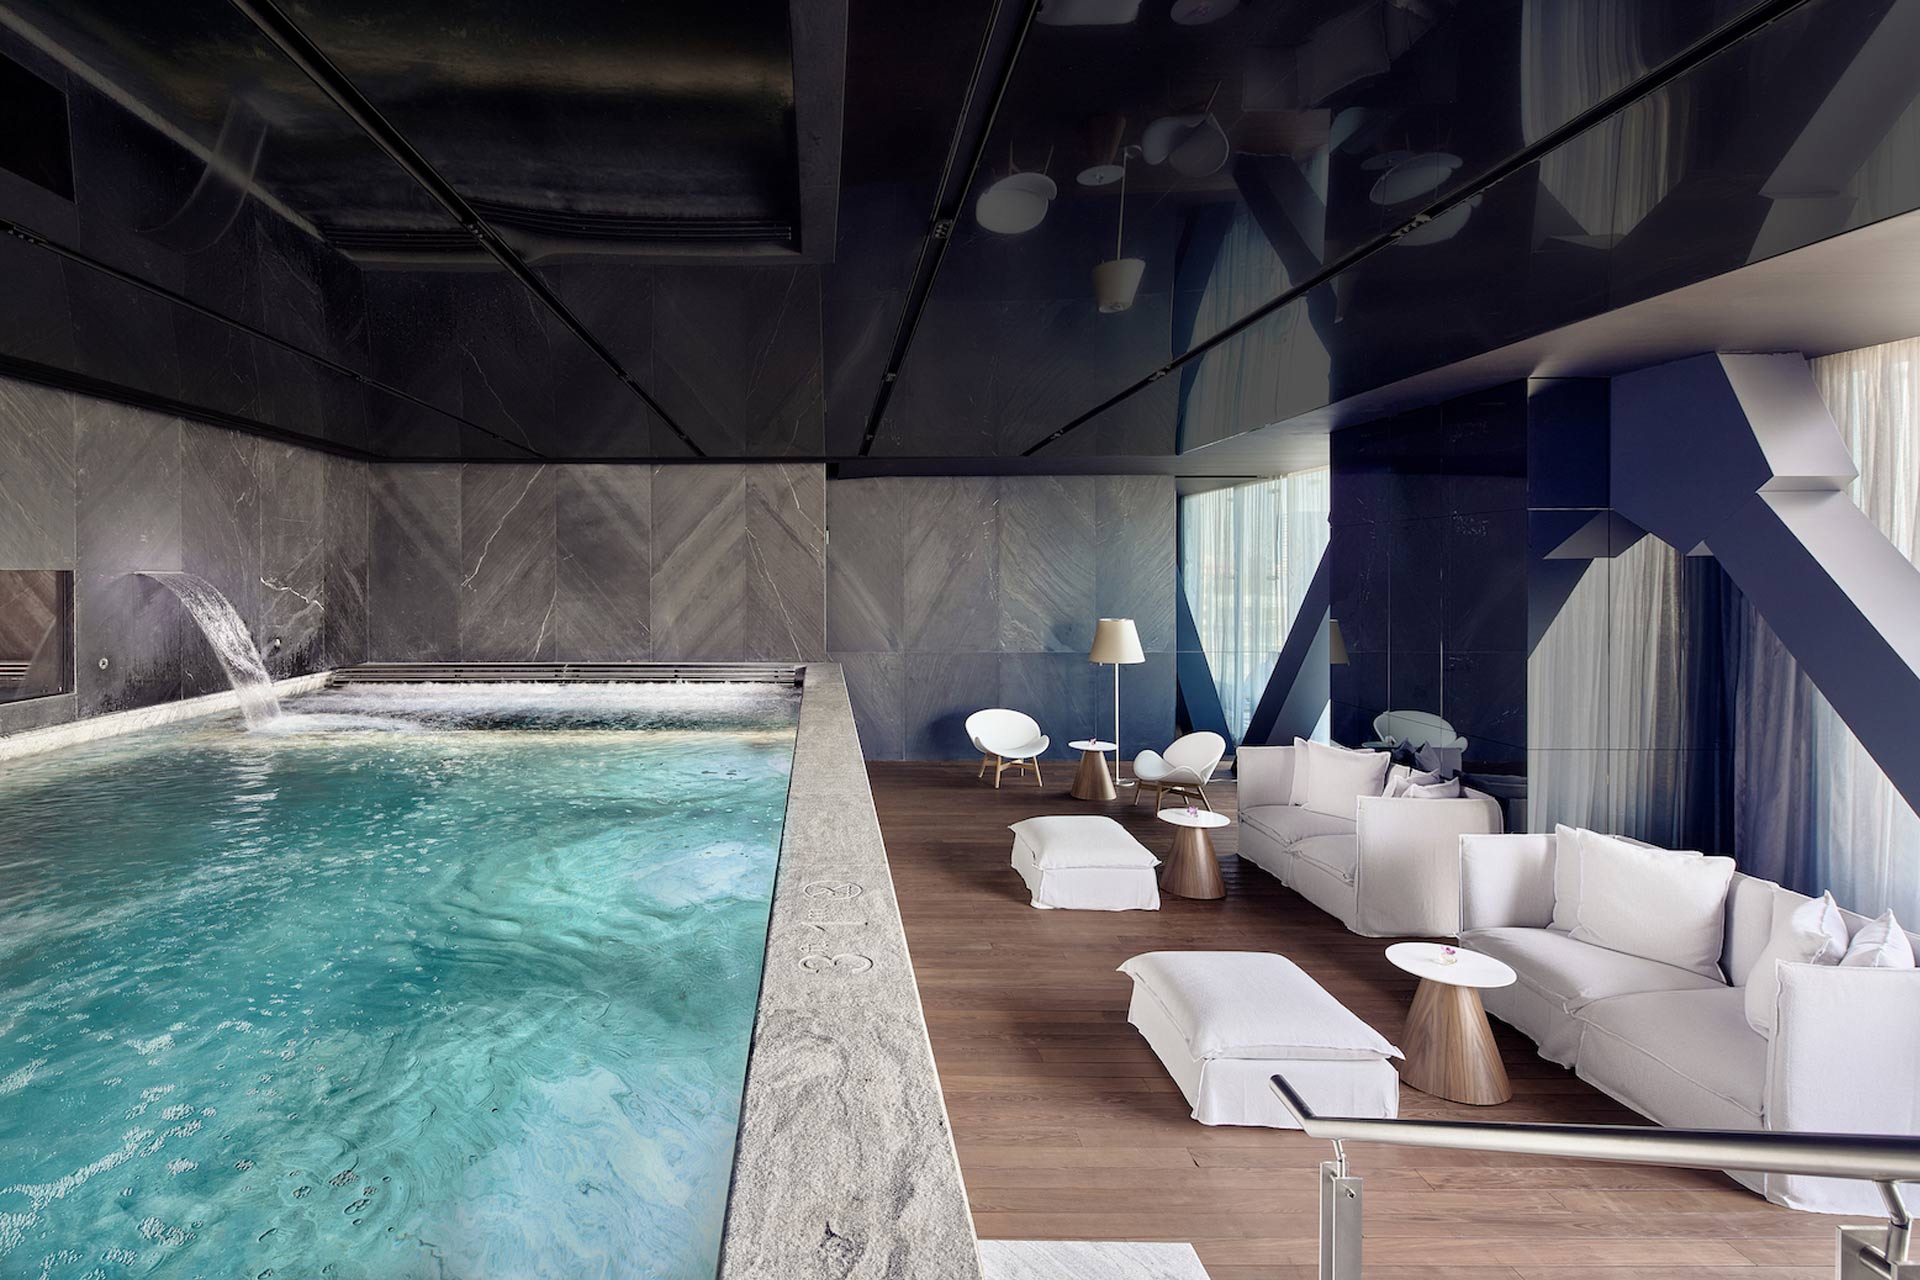 The spa at The Ritz-Carlton in Mexico City